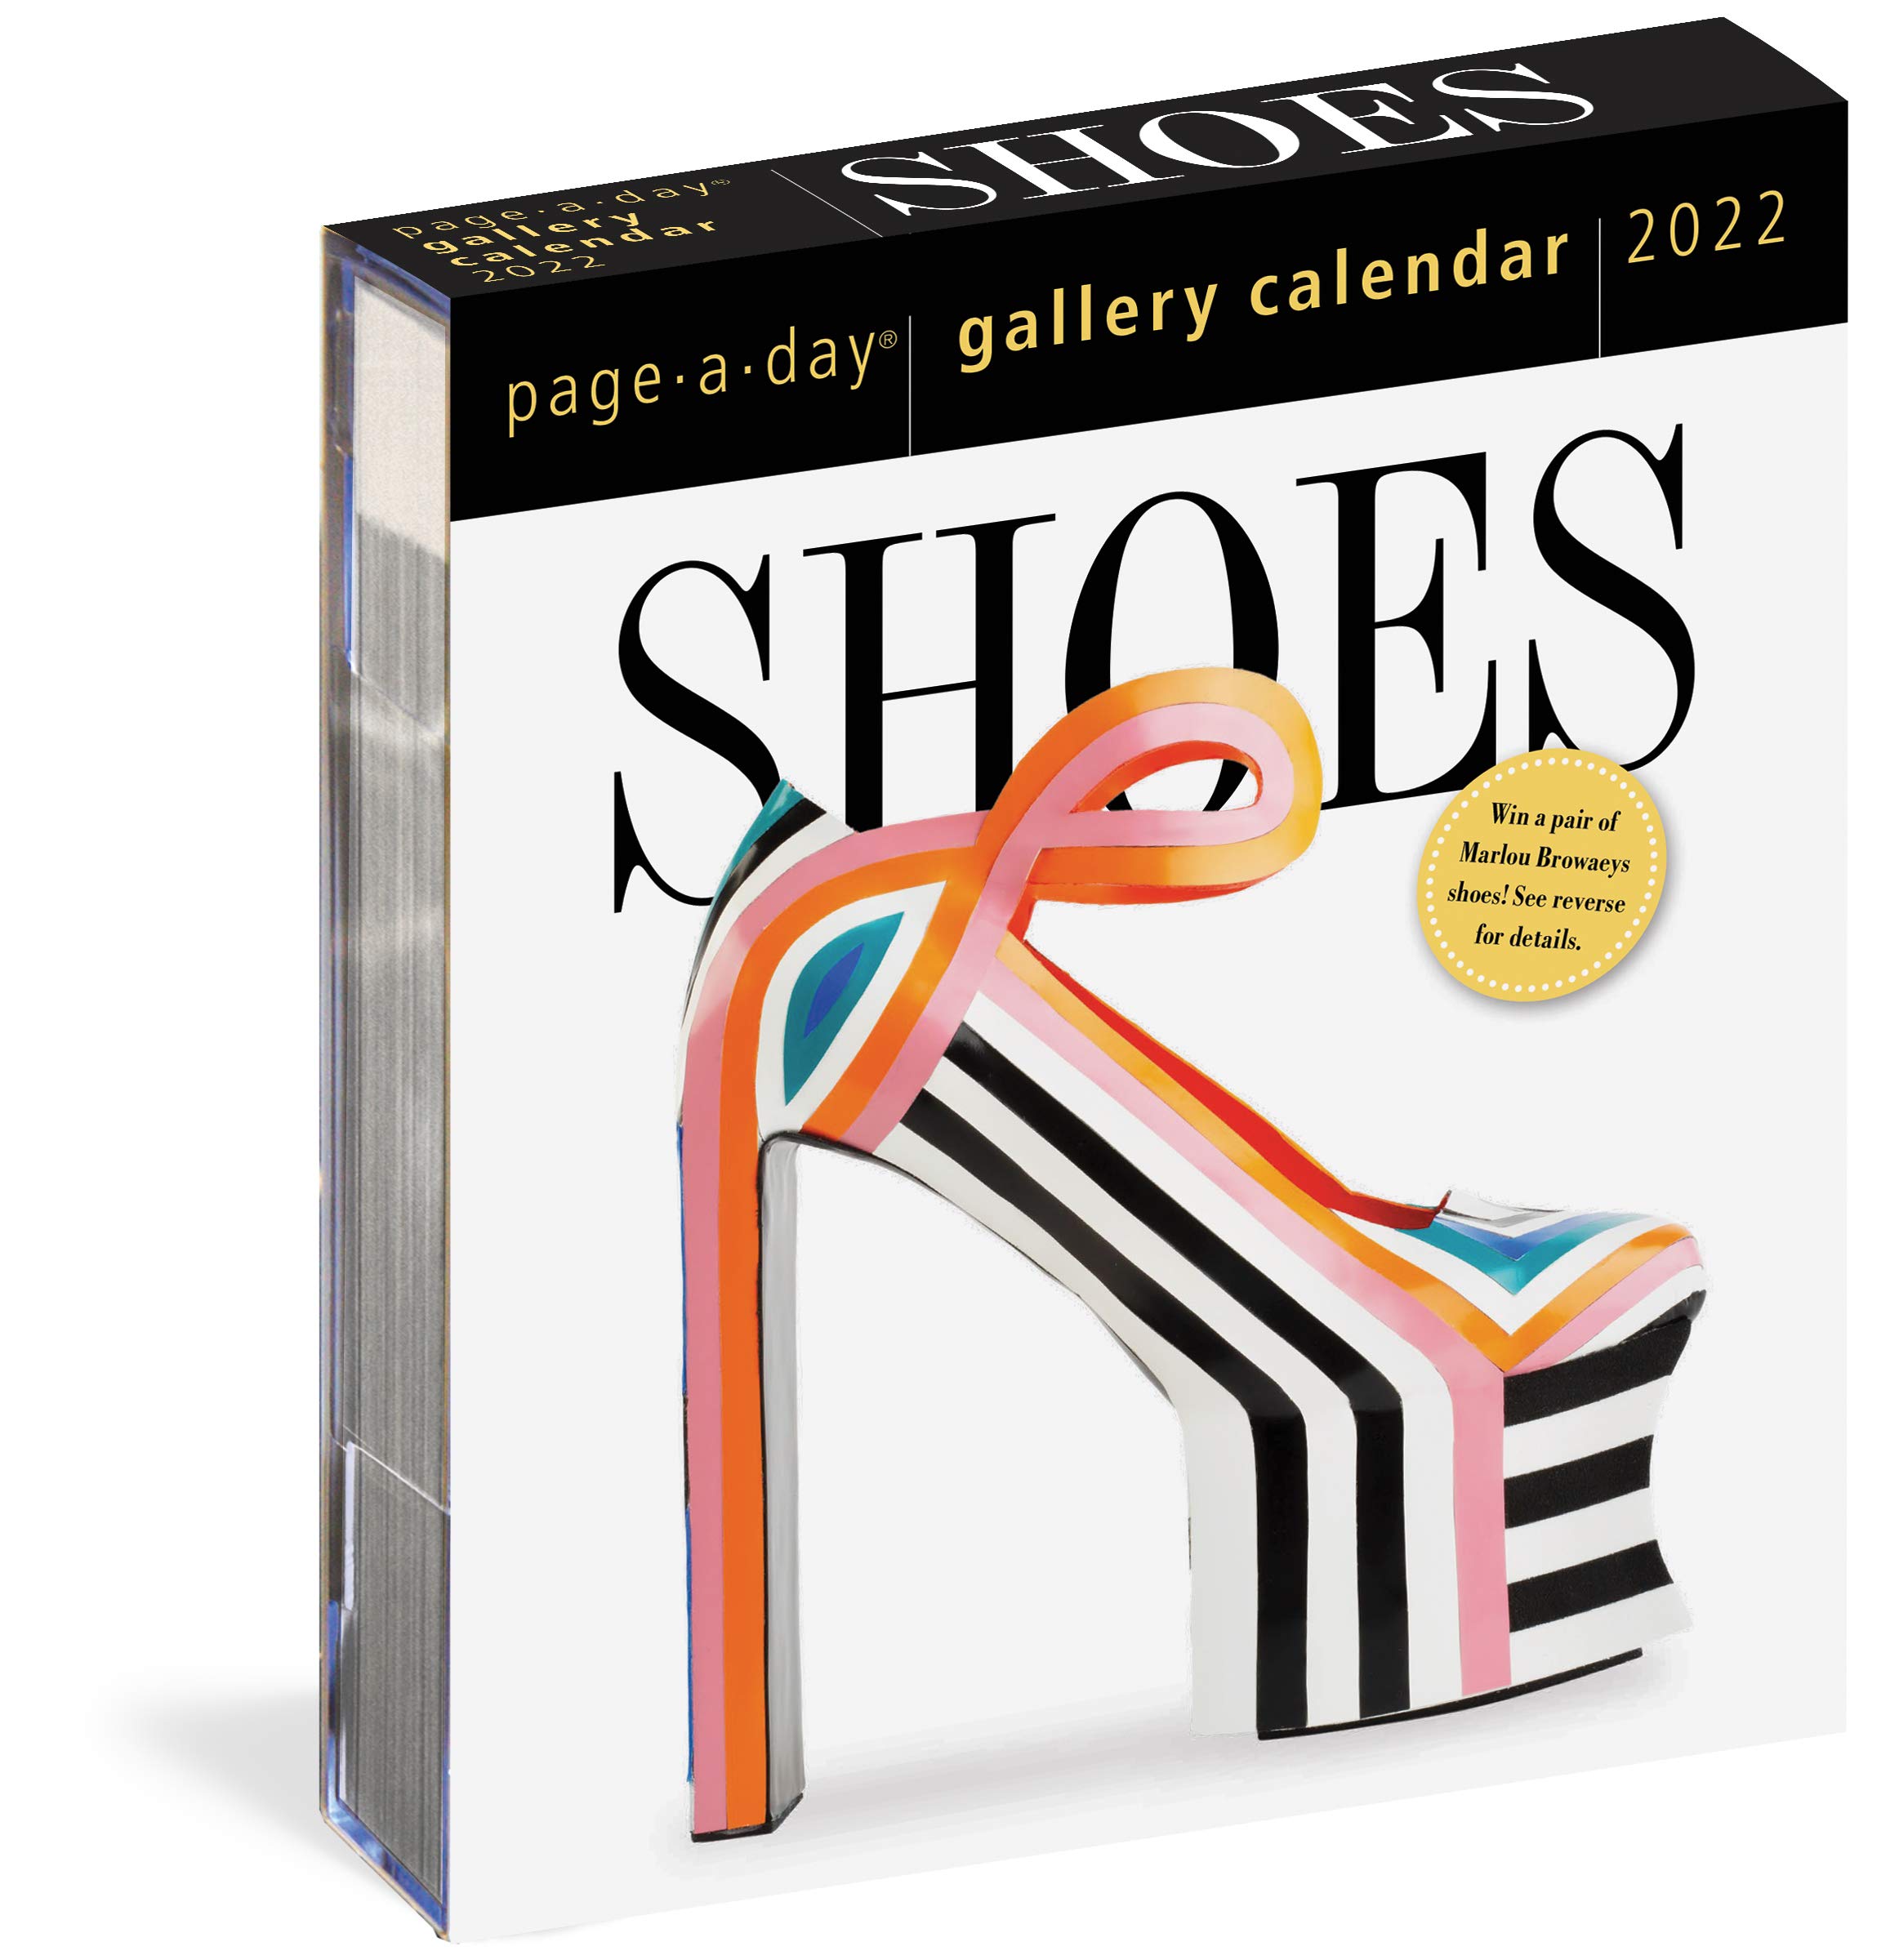 Calendar 2022 - Page-A-Day Gallery Calendar: Shoes | Workman Publishing